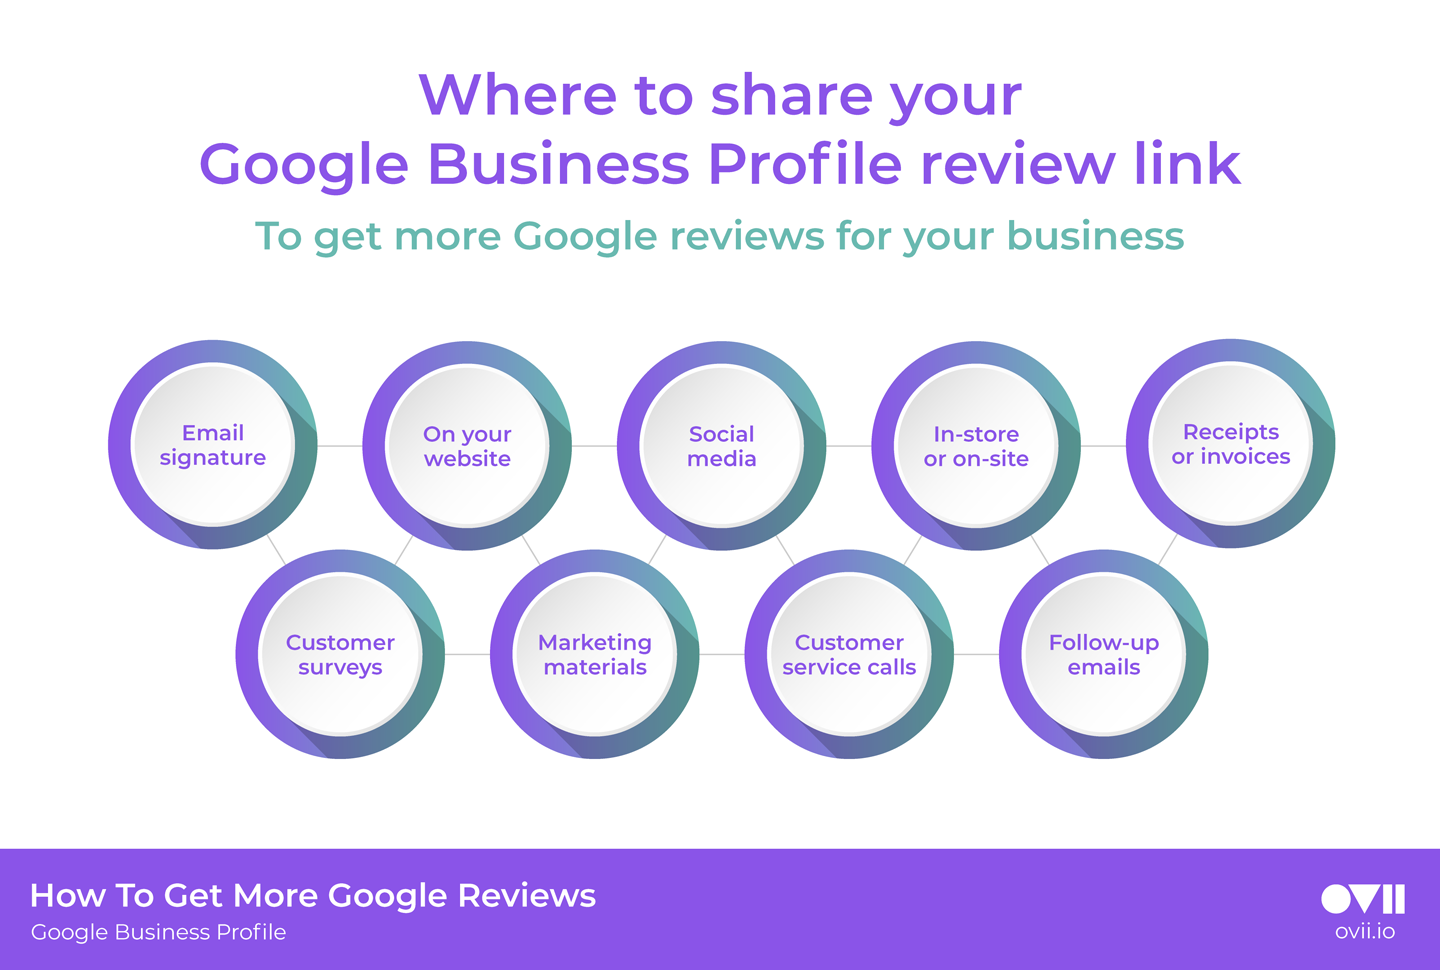 infographic giving a visual description of the different places to share your Google Business Profile review link to get more Google reviews for your business